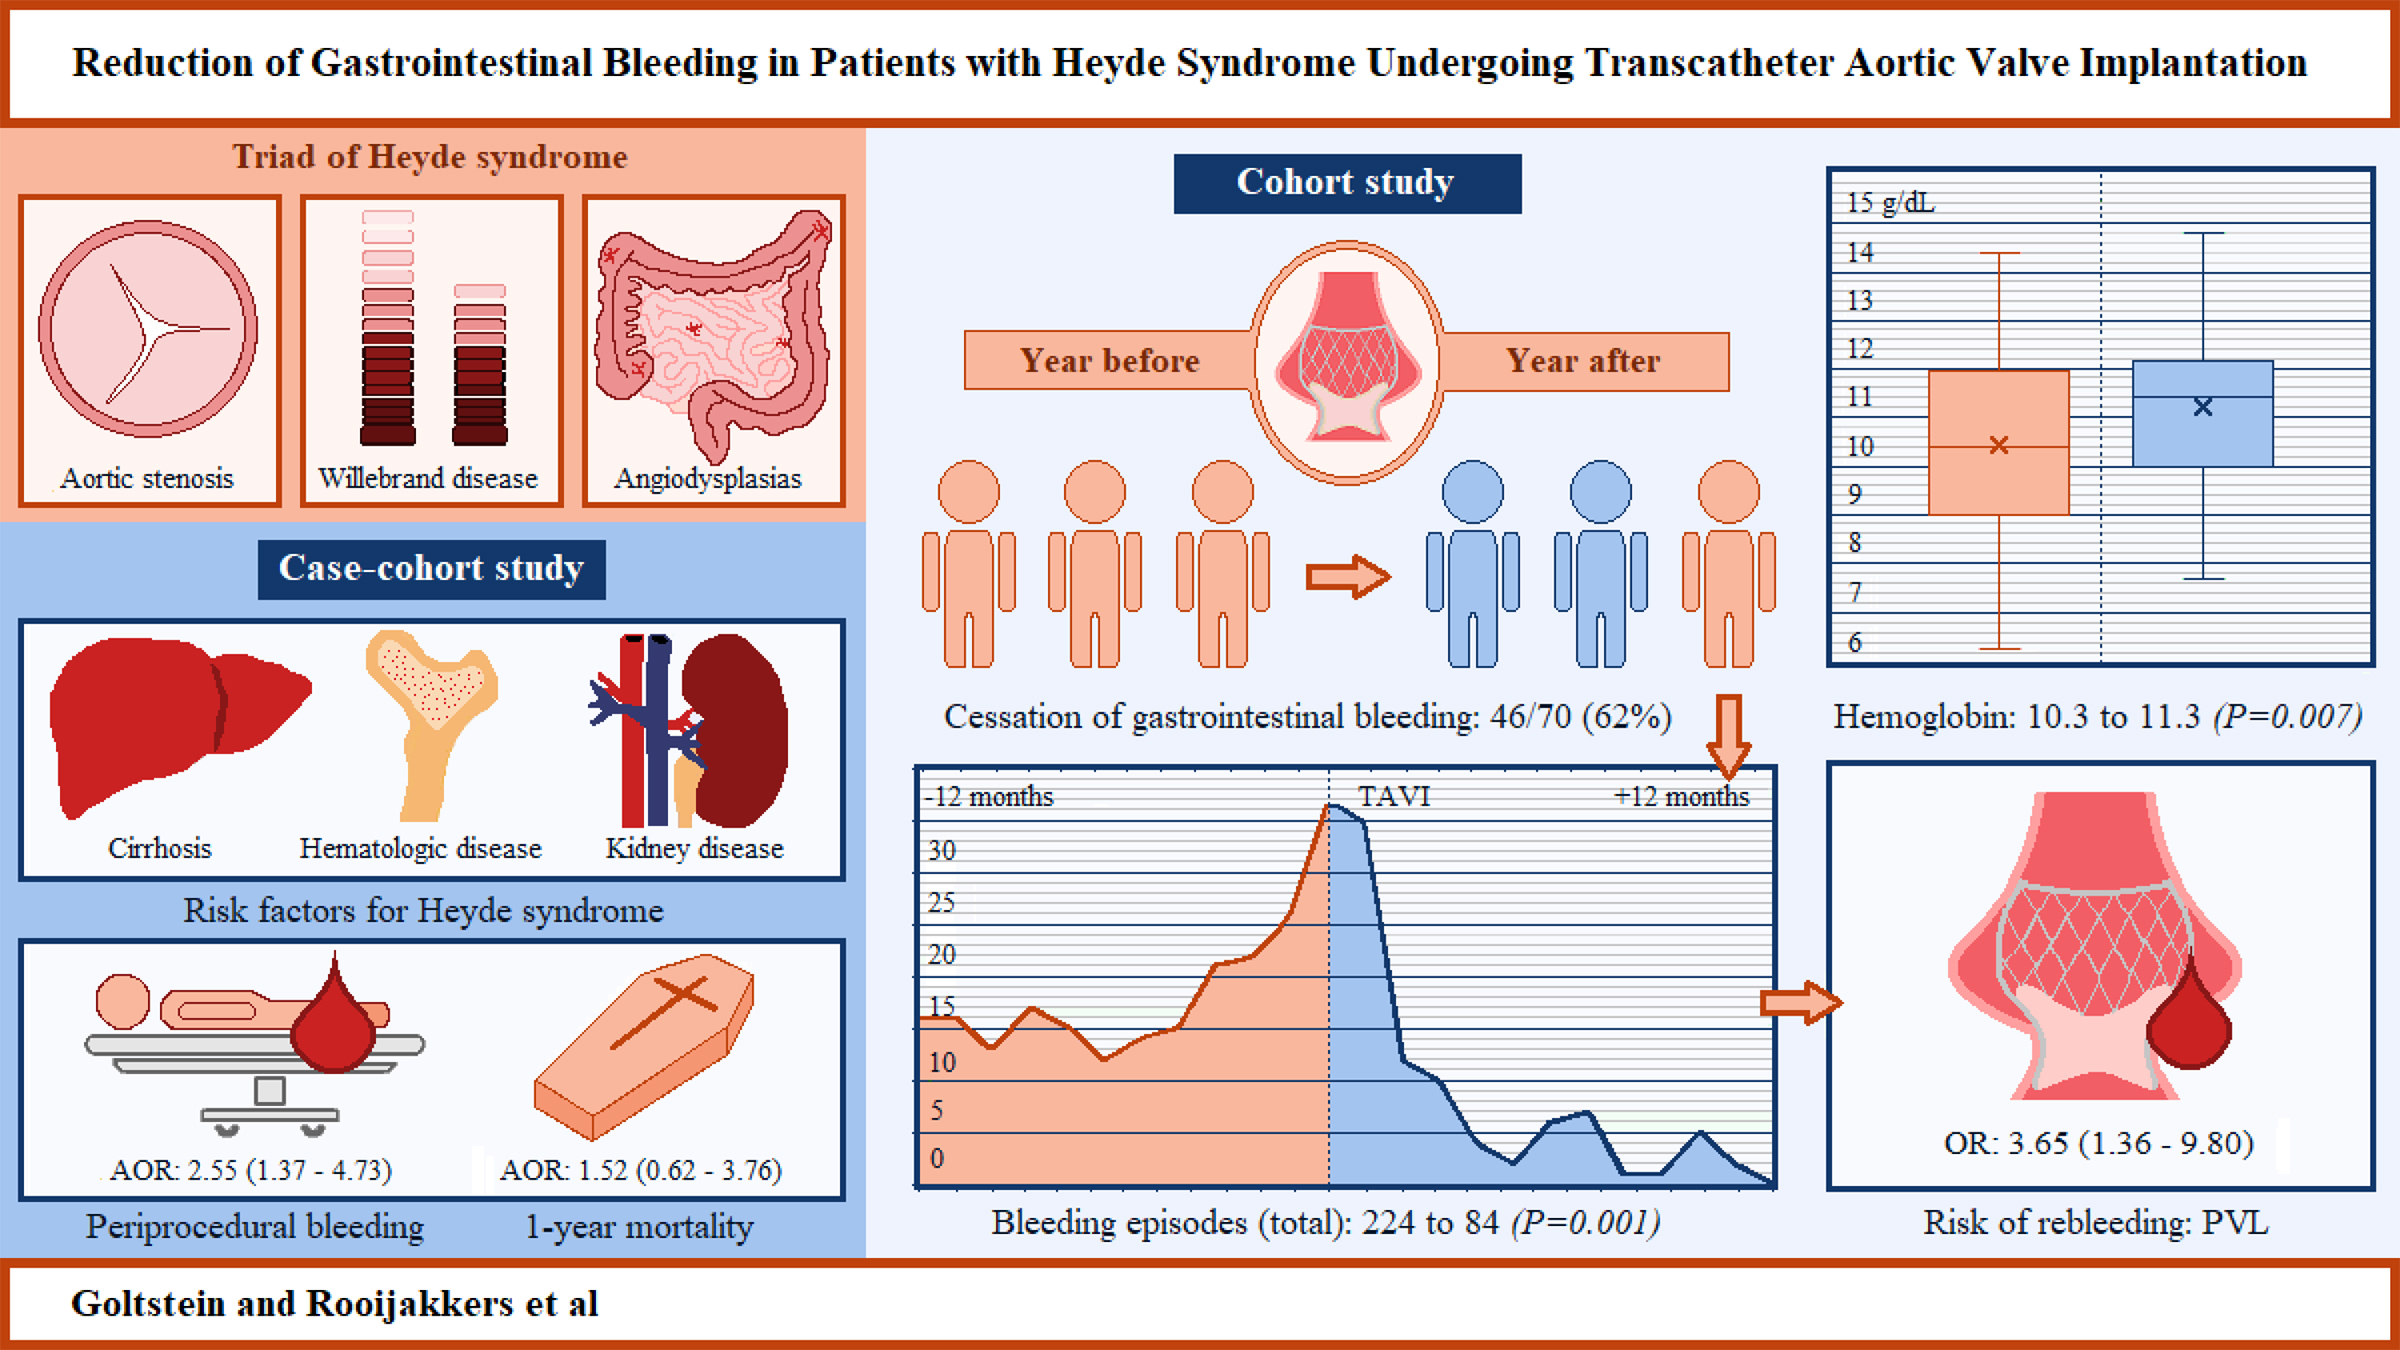 Reduction of Gastrointestinal Bleeding in Patients With Heyde Syndrome Undergoing Transcatheter Aortic Valve Implantation